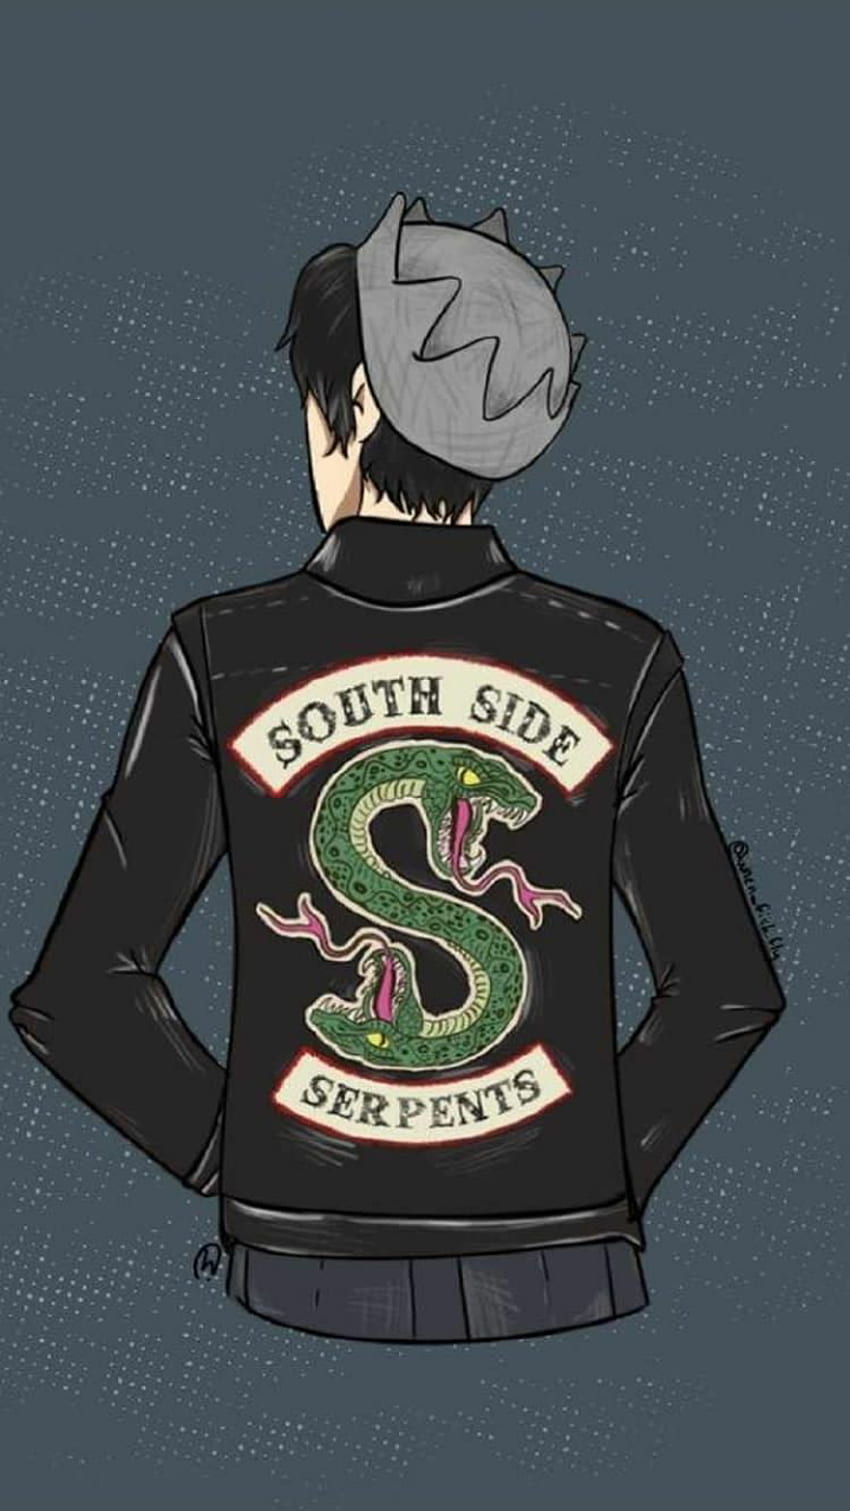 Southside Serpents wallpaper by Tunahanxd  Download on ZEDGE  f37d